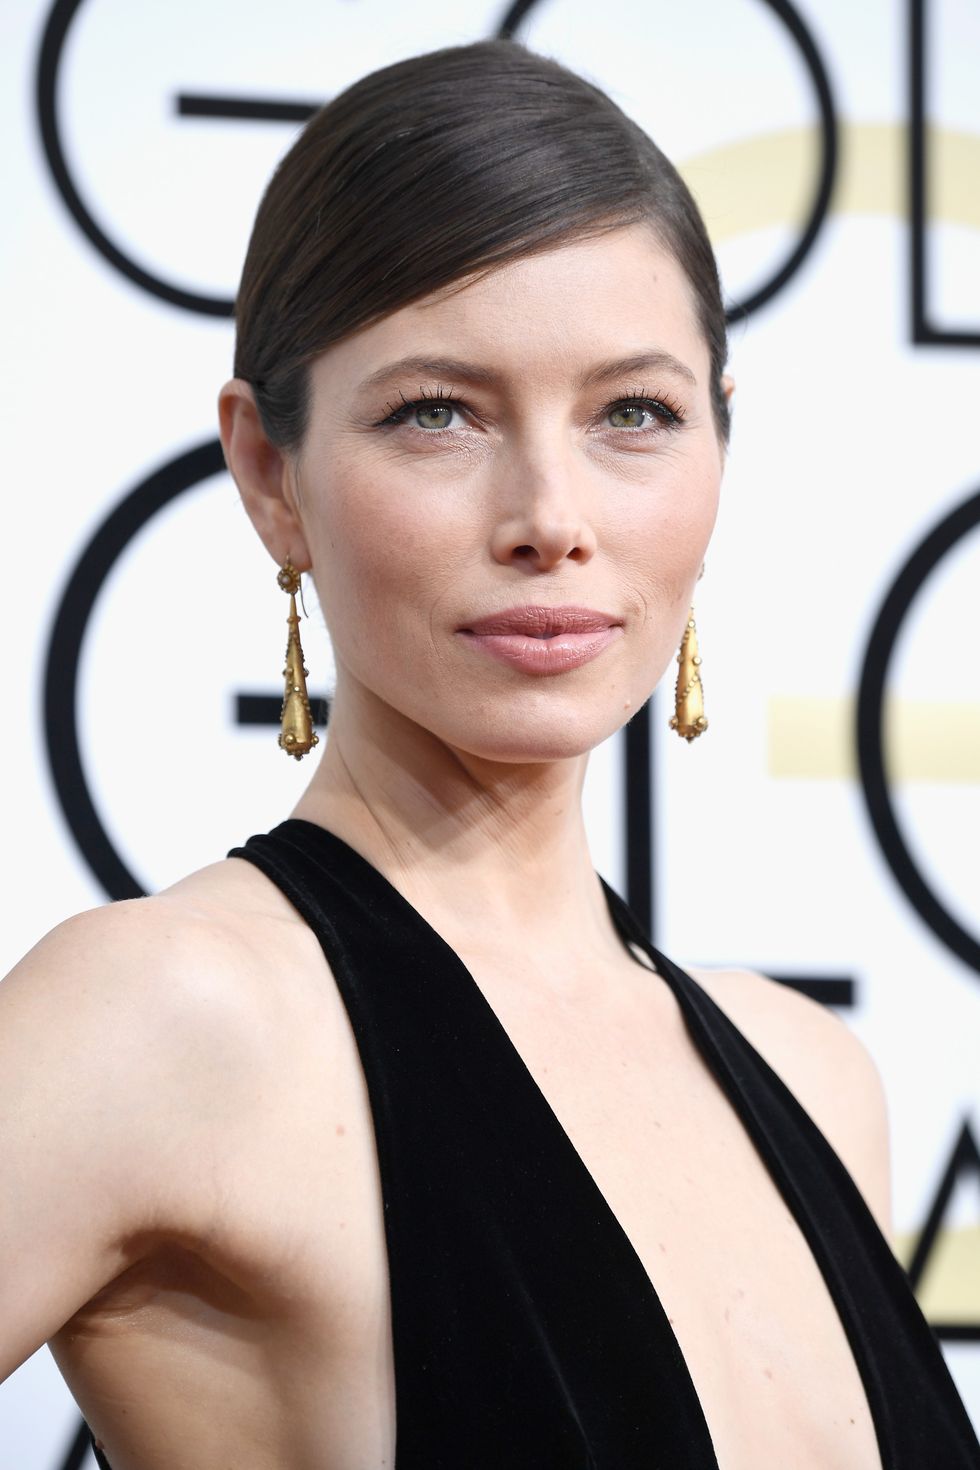 BEVERLY HILLS, CA - JANUARY 08:  Actress Jessica Biel attends the 74th Annual Golden Globe Awards at The Beverly Hilton Hotel on January 8, 2017 in Beverly Hills, California.  (Photo by Frazer Harrison/Getty Images)